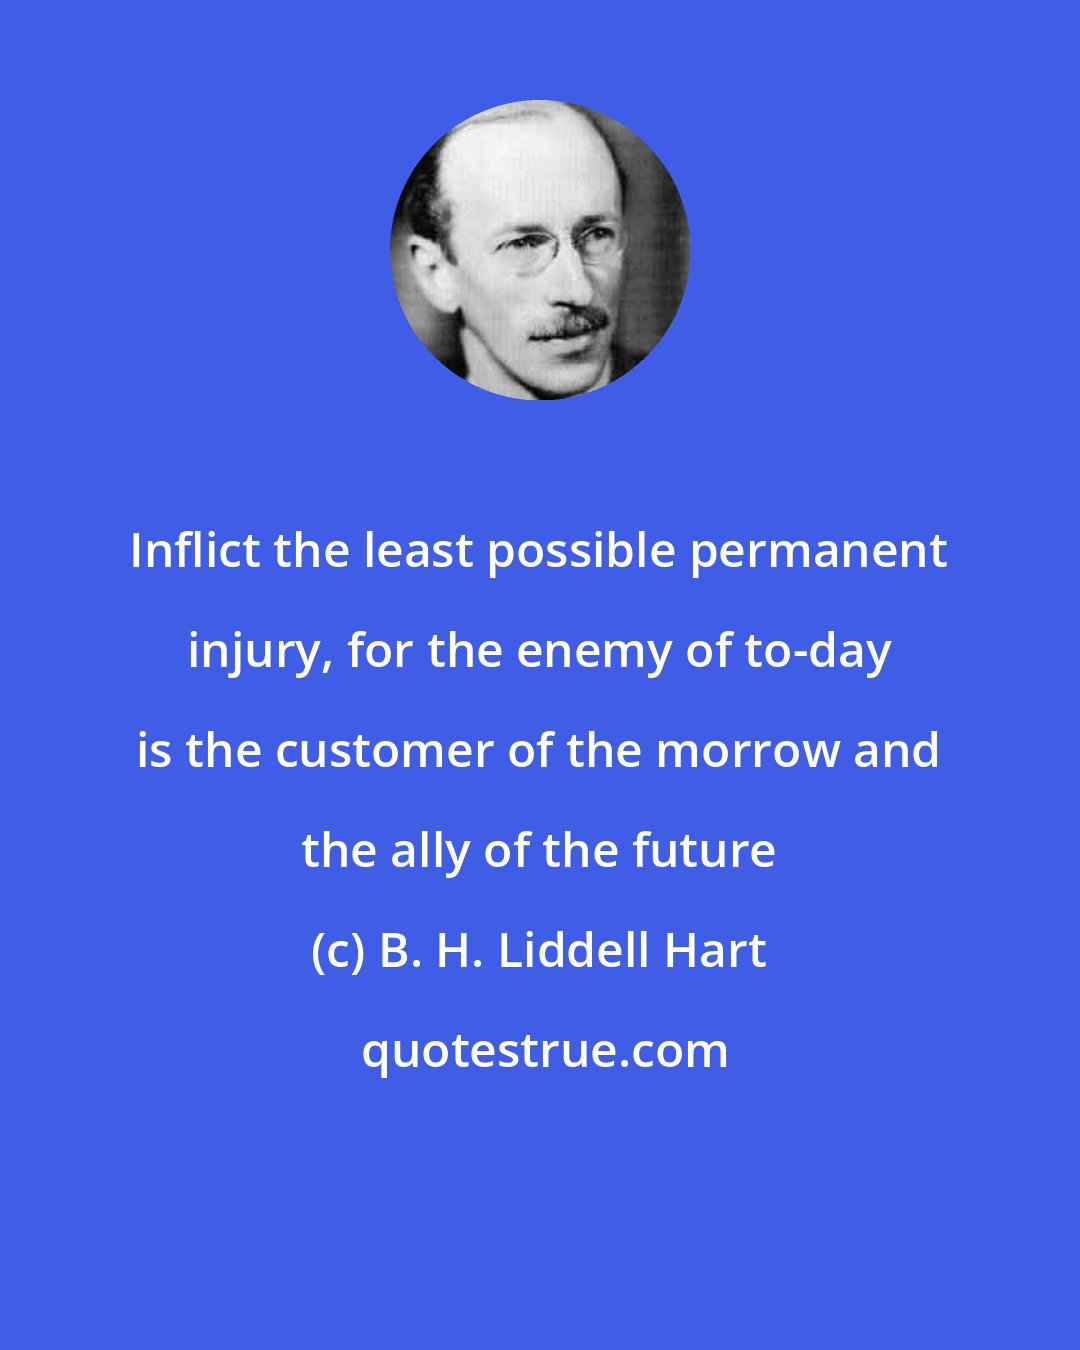 B. H. Liddell Hart: Inflict the least possible permanent injury, for the enemy of to-day is the customer of the morrow and the ally of the future